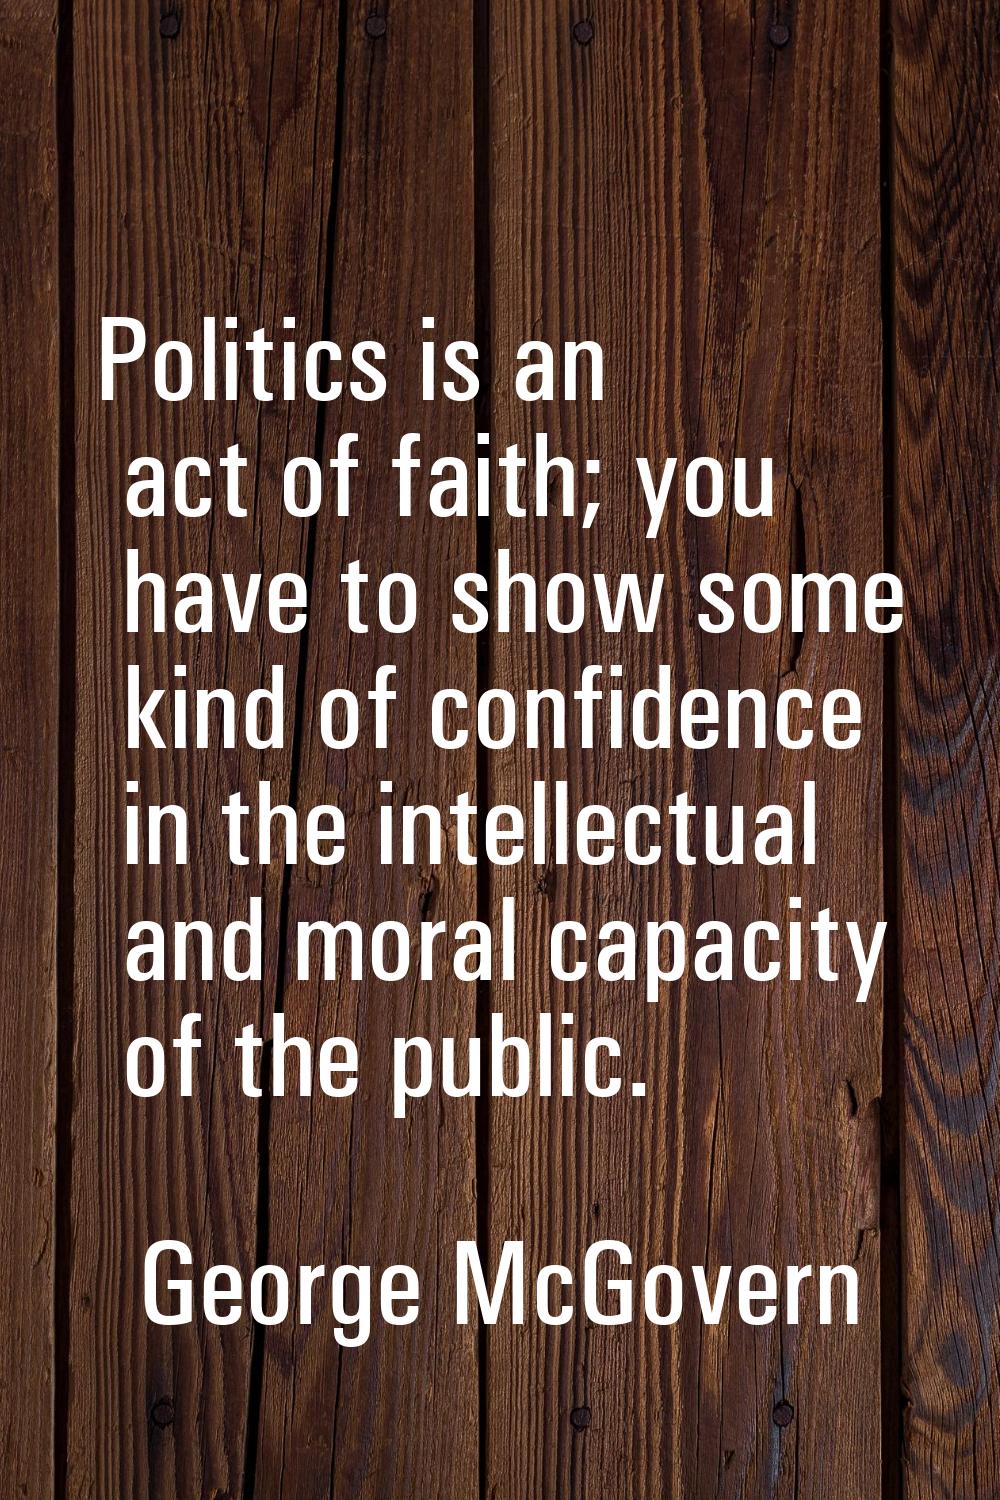 Politics is an act of faith; you have to show some kind of confidence in the intellectual and moral